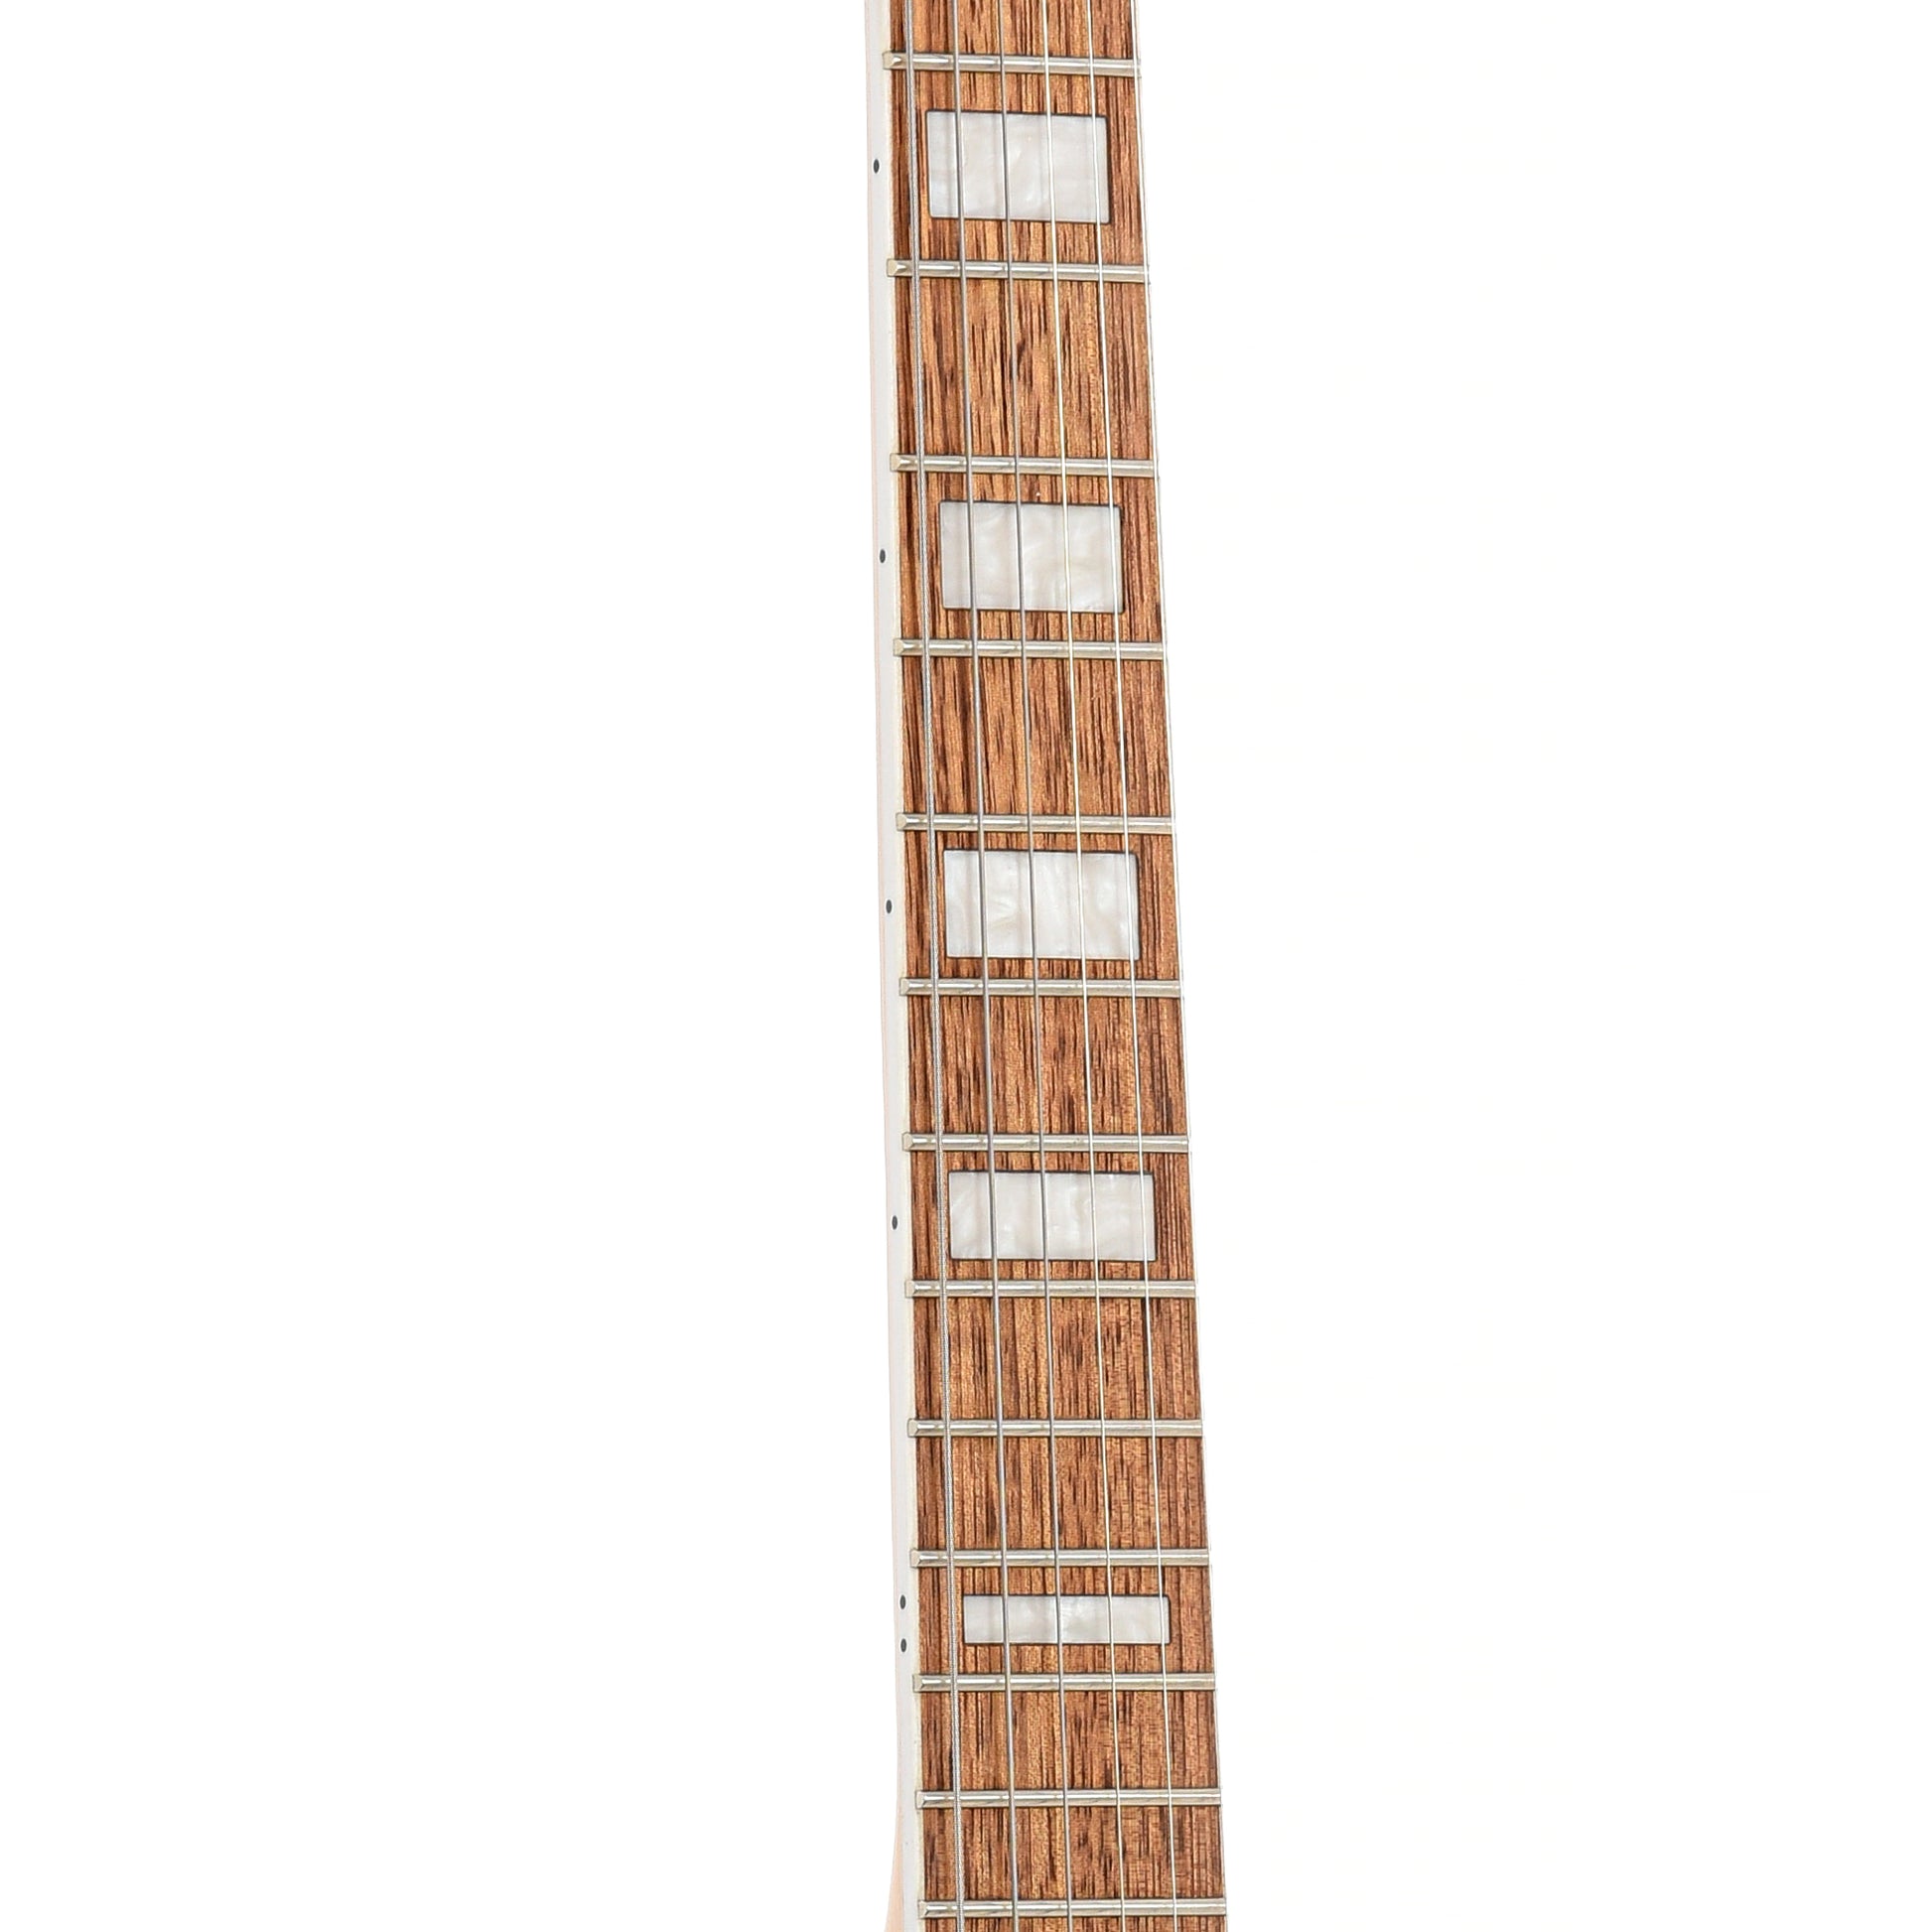 Fretboard of Ibanez AX120 Electric Guitar, Metallic Forest